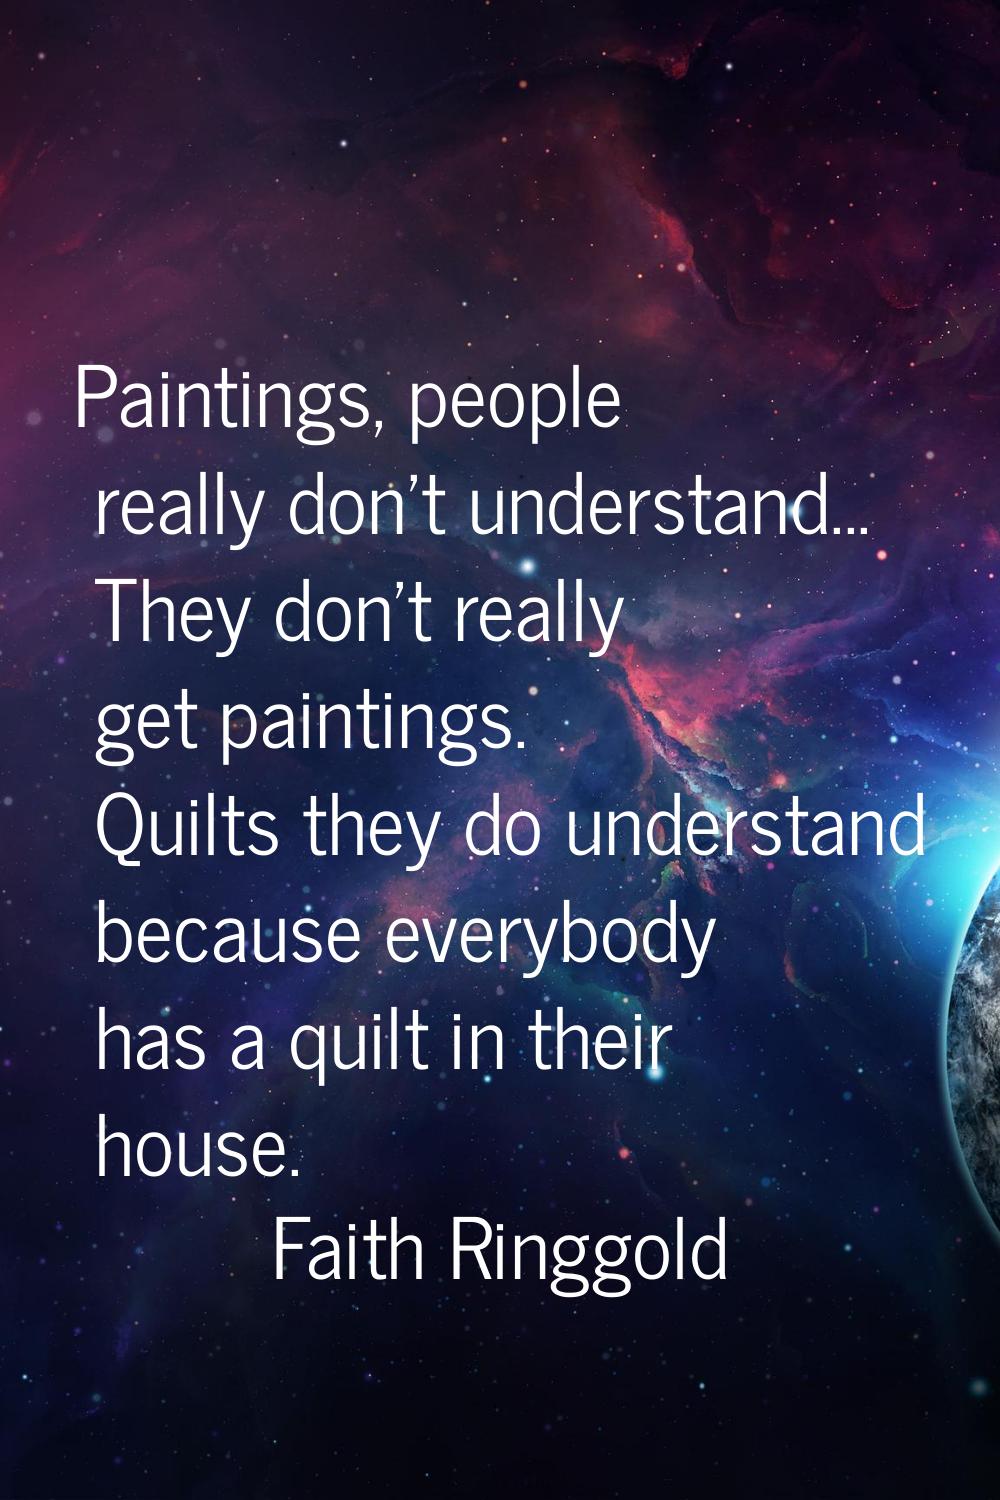 Paintings, people really don't understand... They don't really get paintings. Quilts they do unders